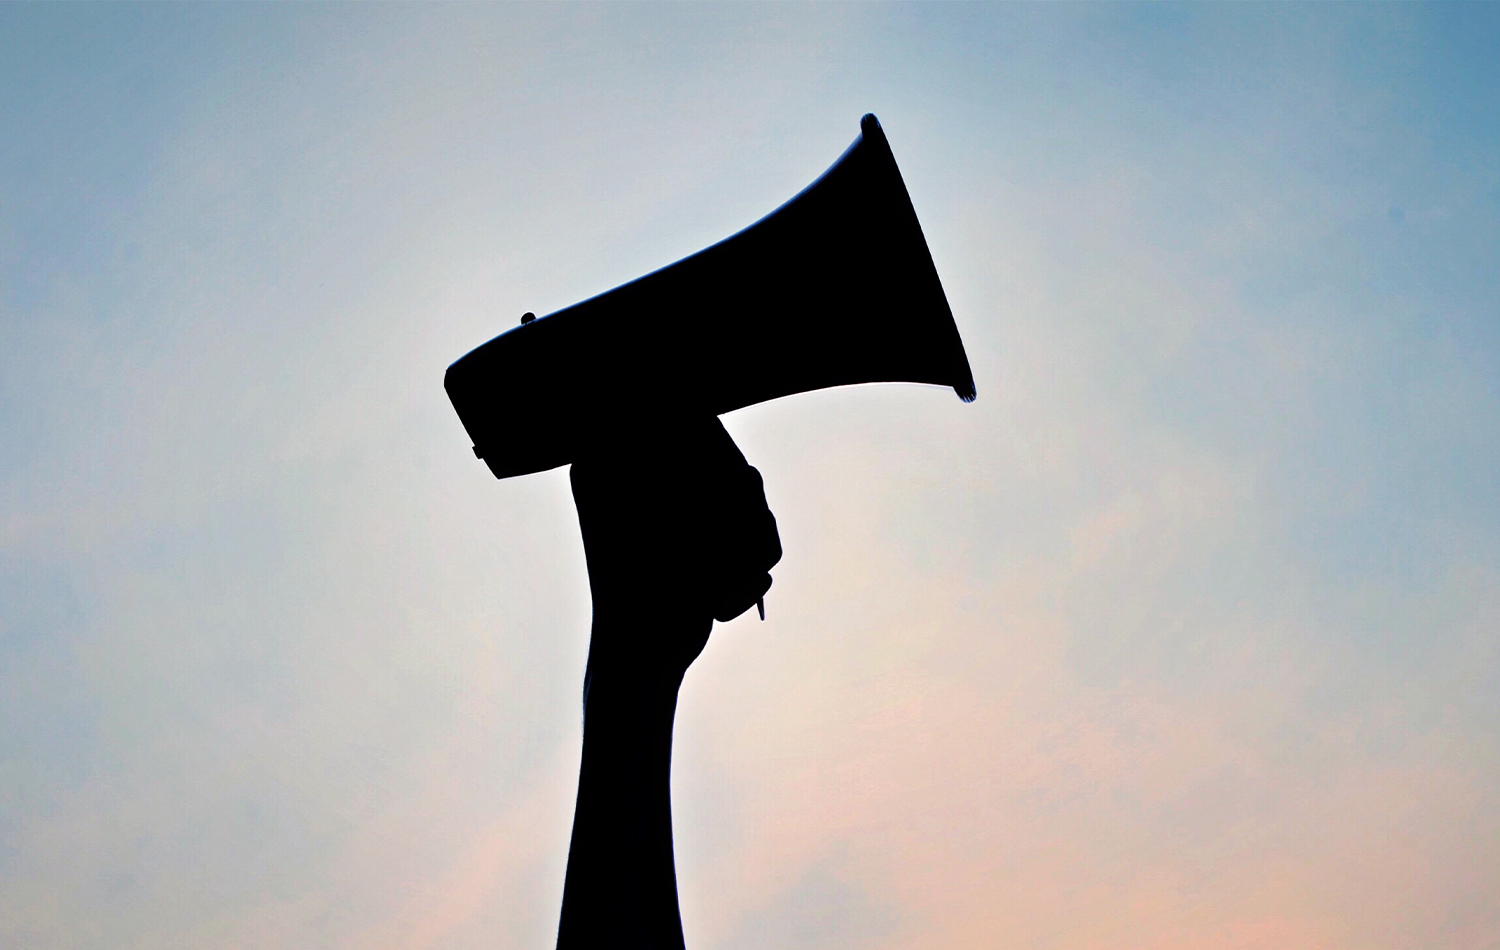 Megaphone held aloft by a person, in silhouette against the sky.